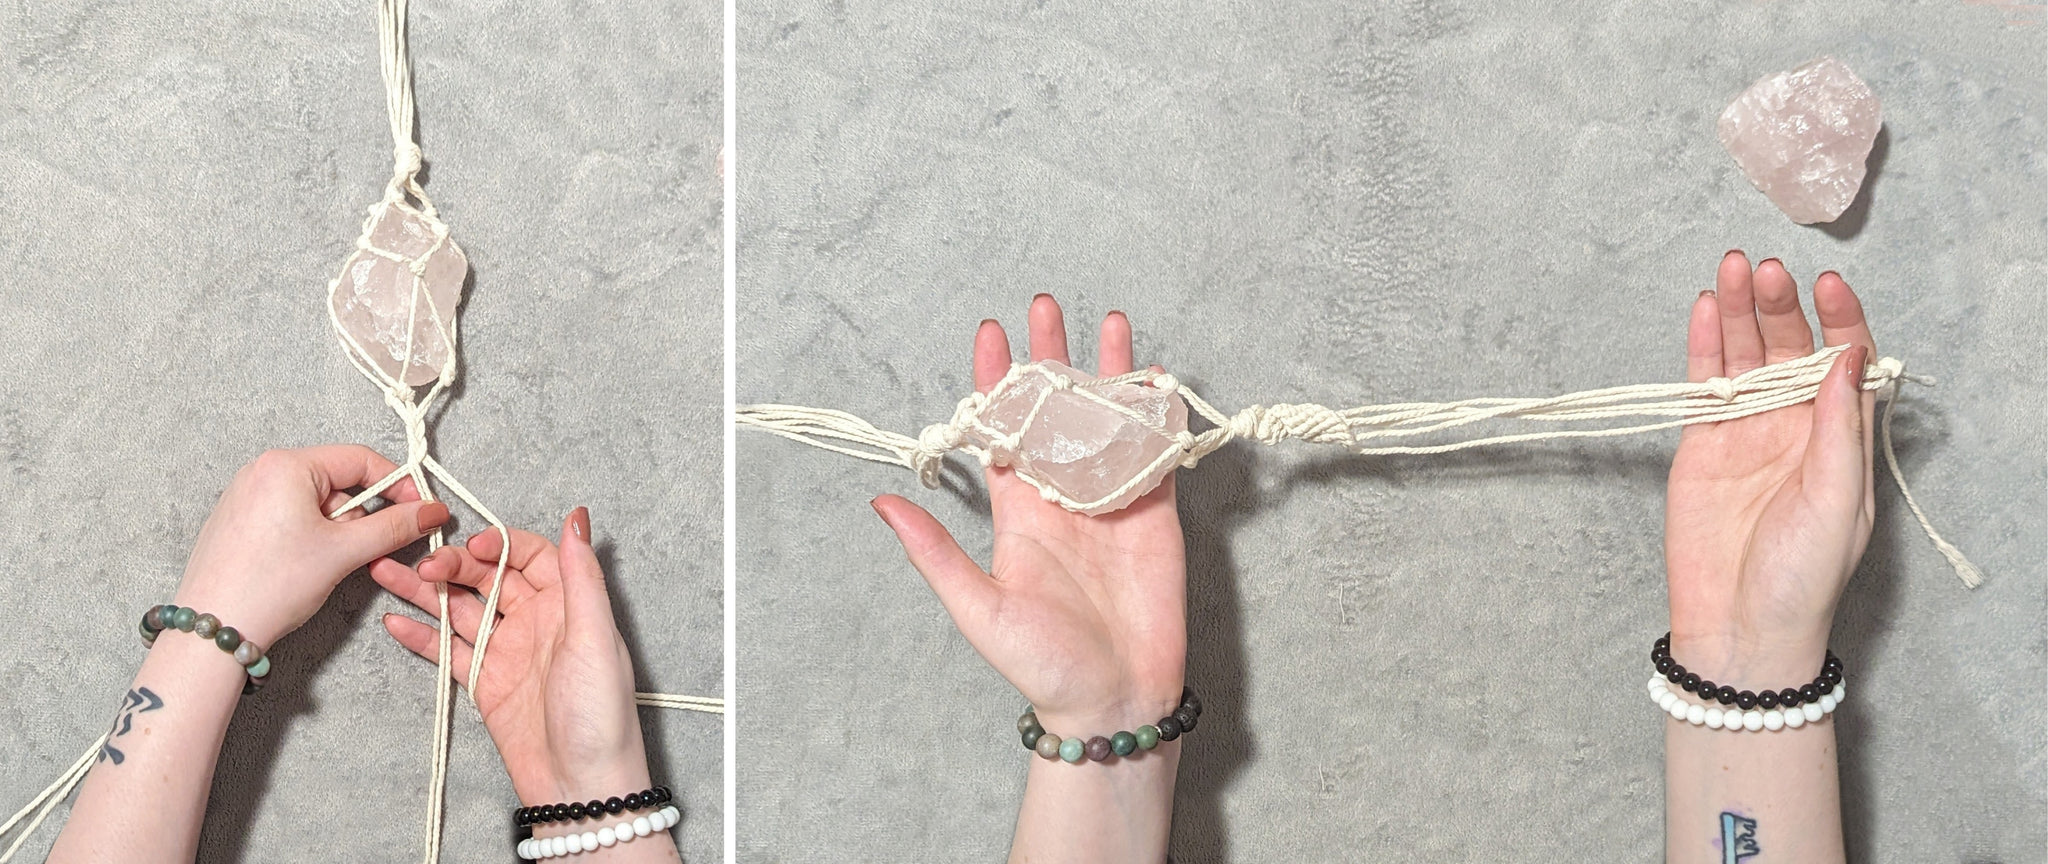 Showing the finishing steps as both a braid and a string of knots that create a twisting pattern